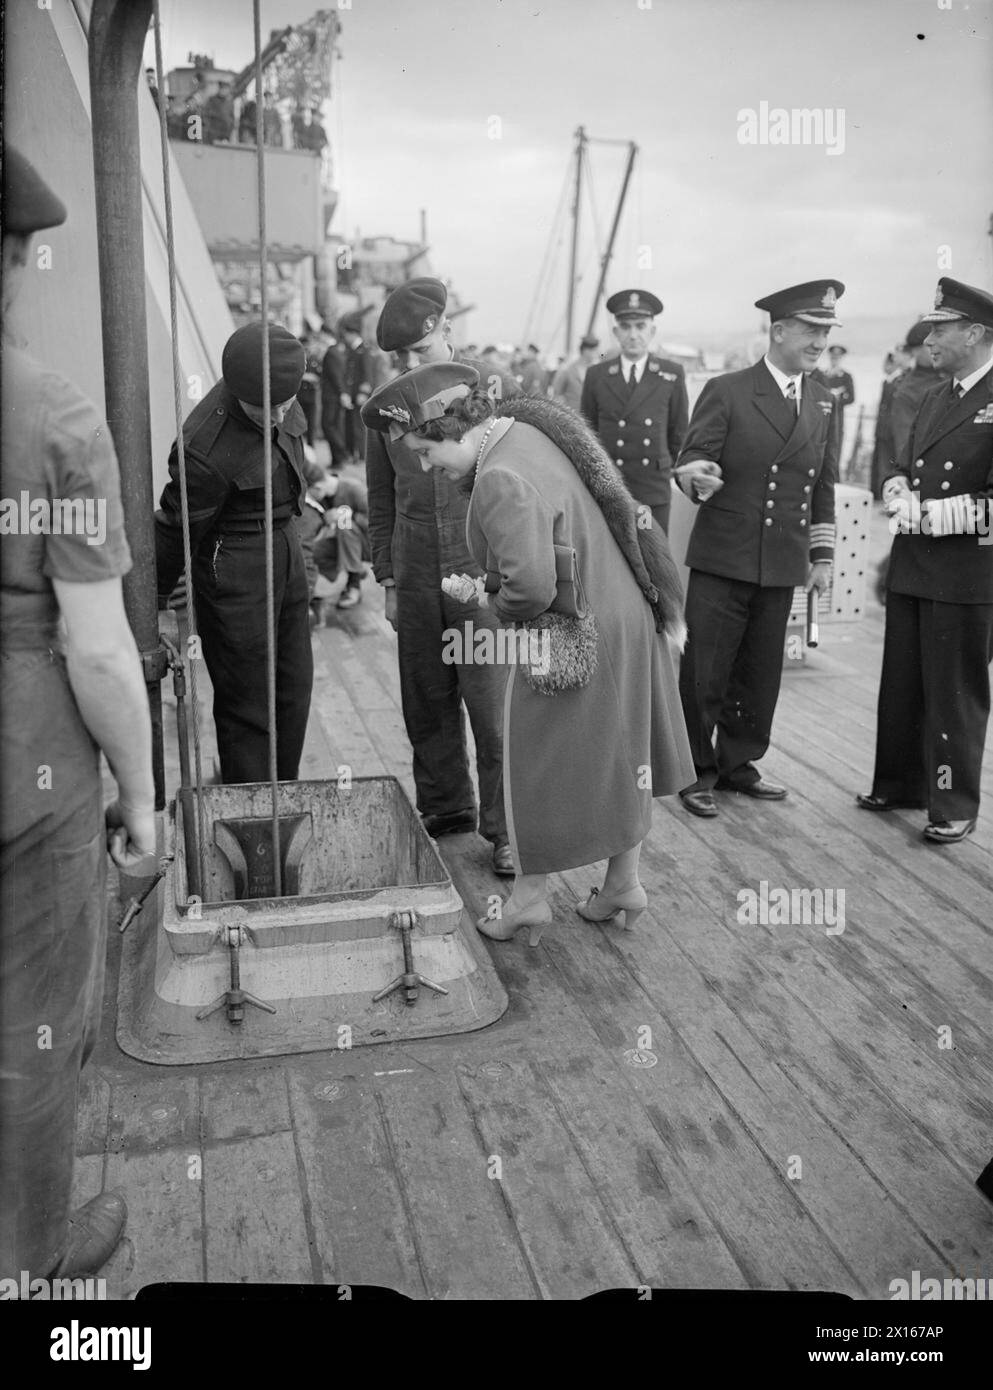 ROYAL VISIT TO HMS KING GEORGE V. 29 OCTOBER 1944, GREENOCK. THE KING AND QUEEN ACCOMPANIED BY PRINCESS ELIZABETH AND PRINCESS MARGARET PAID A FAREWELL VISIT TO THE BATTLESHIP HMS KING GEORGE V BEFORE SHE LEFT TO JOIN BRITAIN'S EAST INDIES FLEET. - The Queen watching ammunition being lowered to the ammunition locker Stock Photo